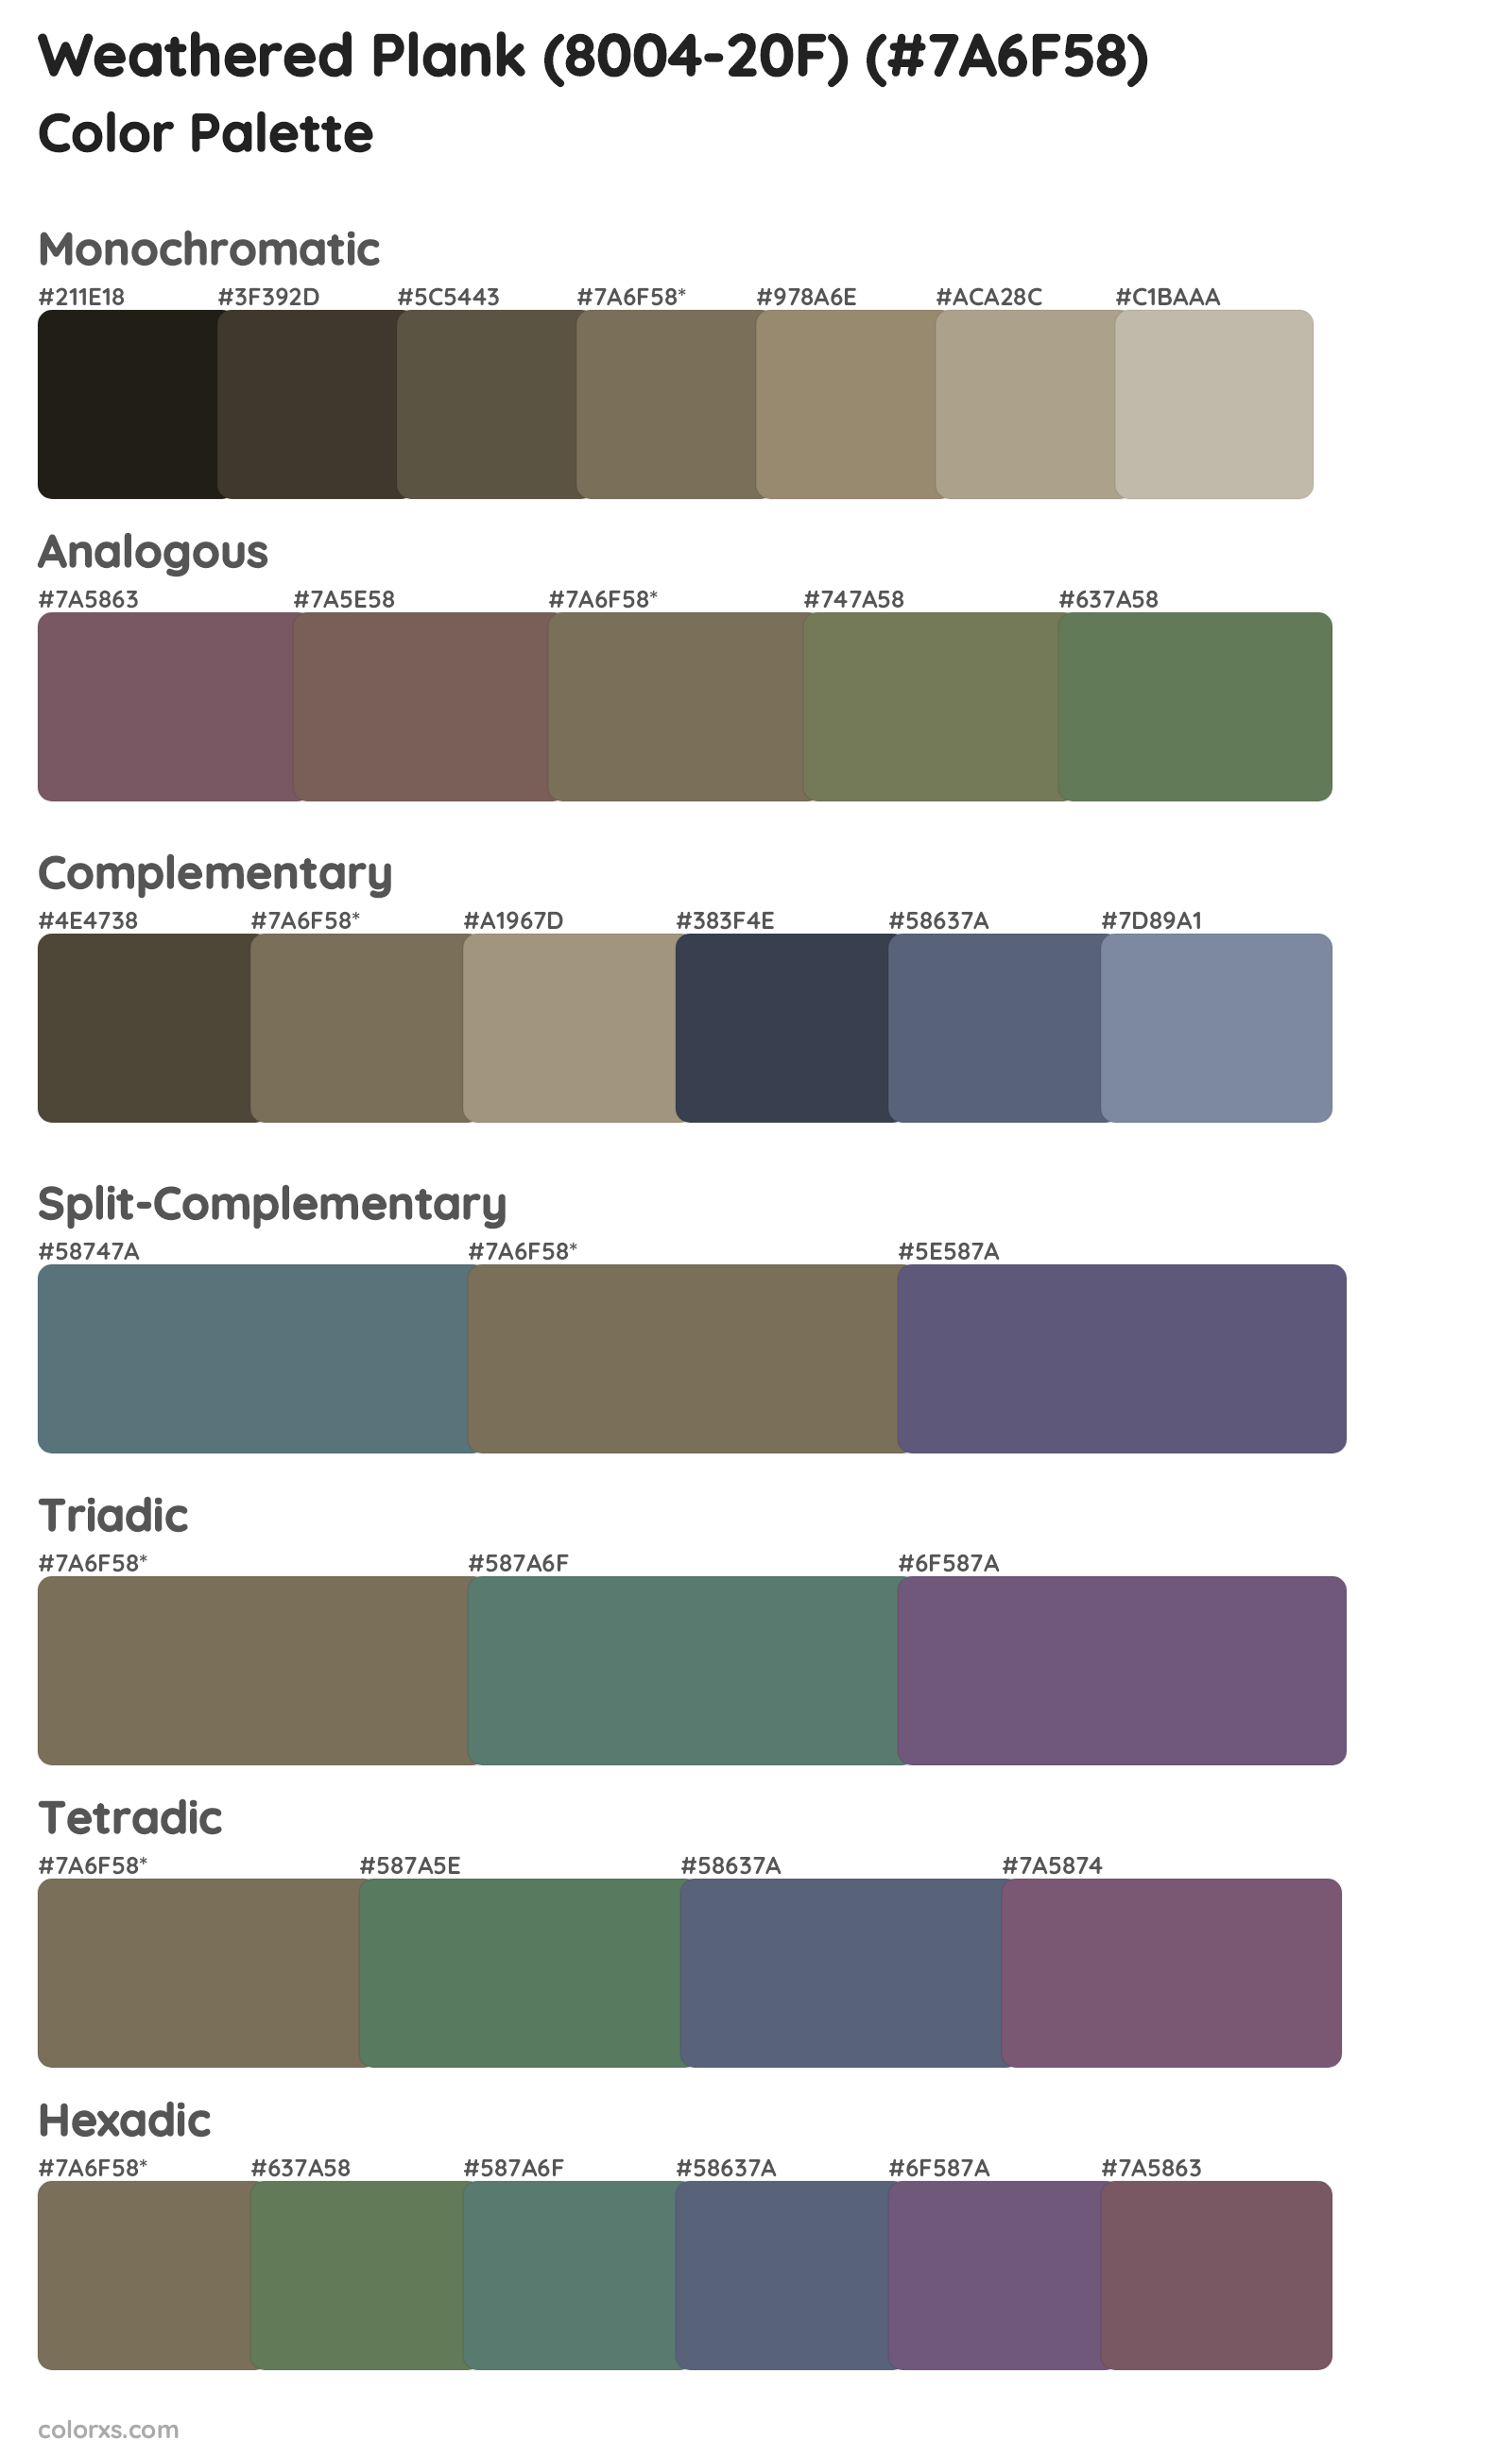 Weathered Plank (8004-20F) Color Scheme Palettes